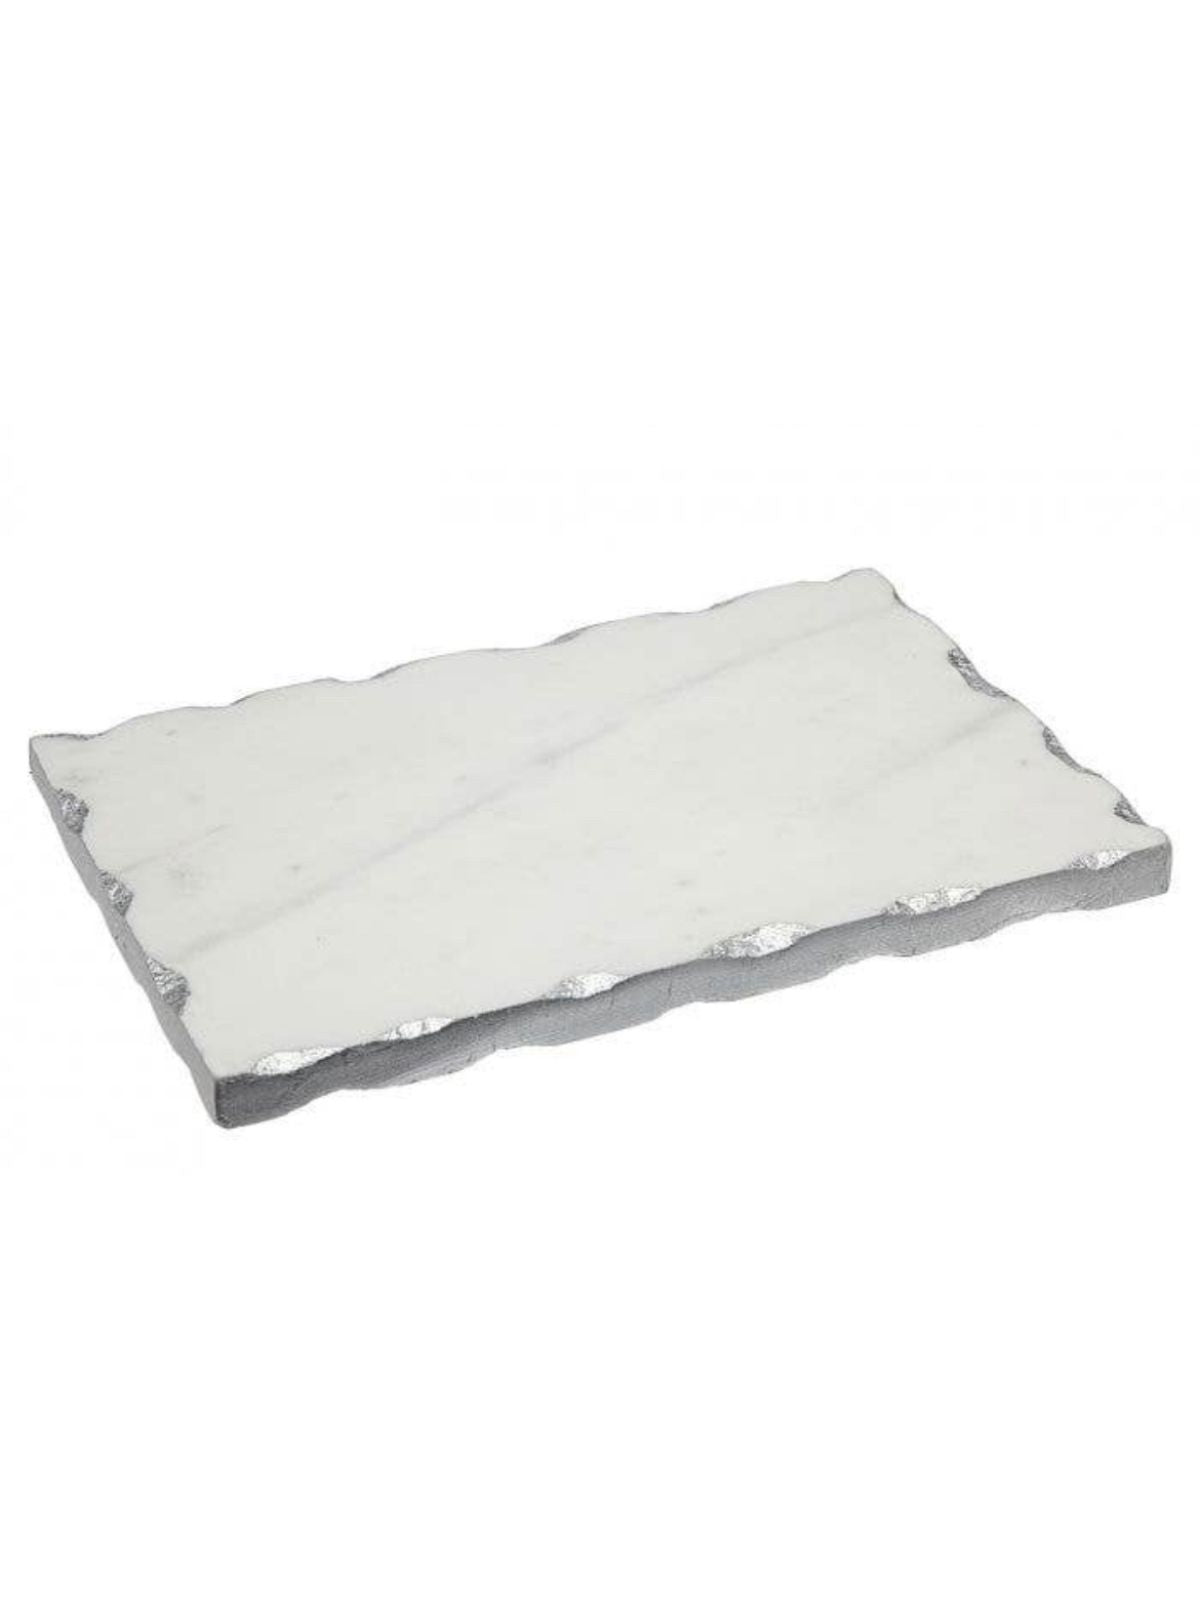 White Marble Decorative Tray with Silver Metallic Edges, 9L x 6W. 